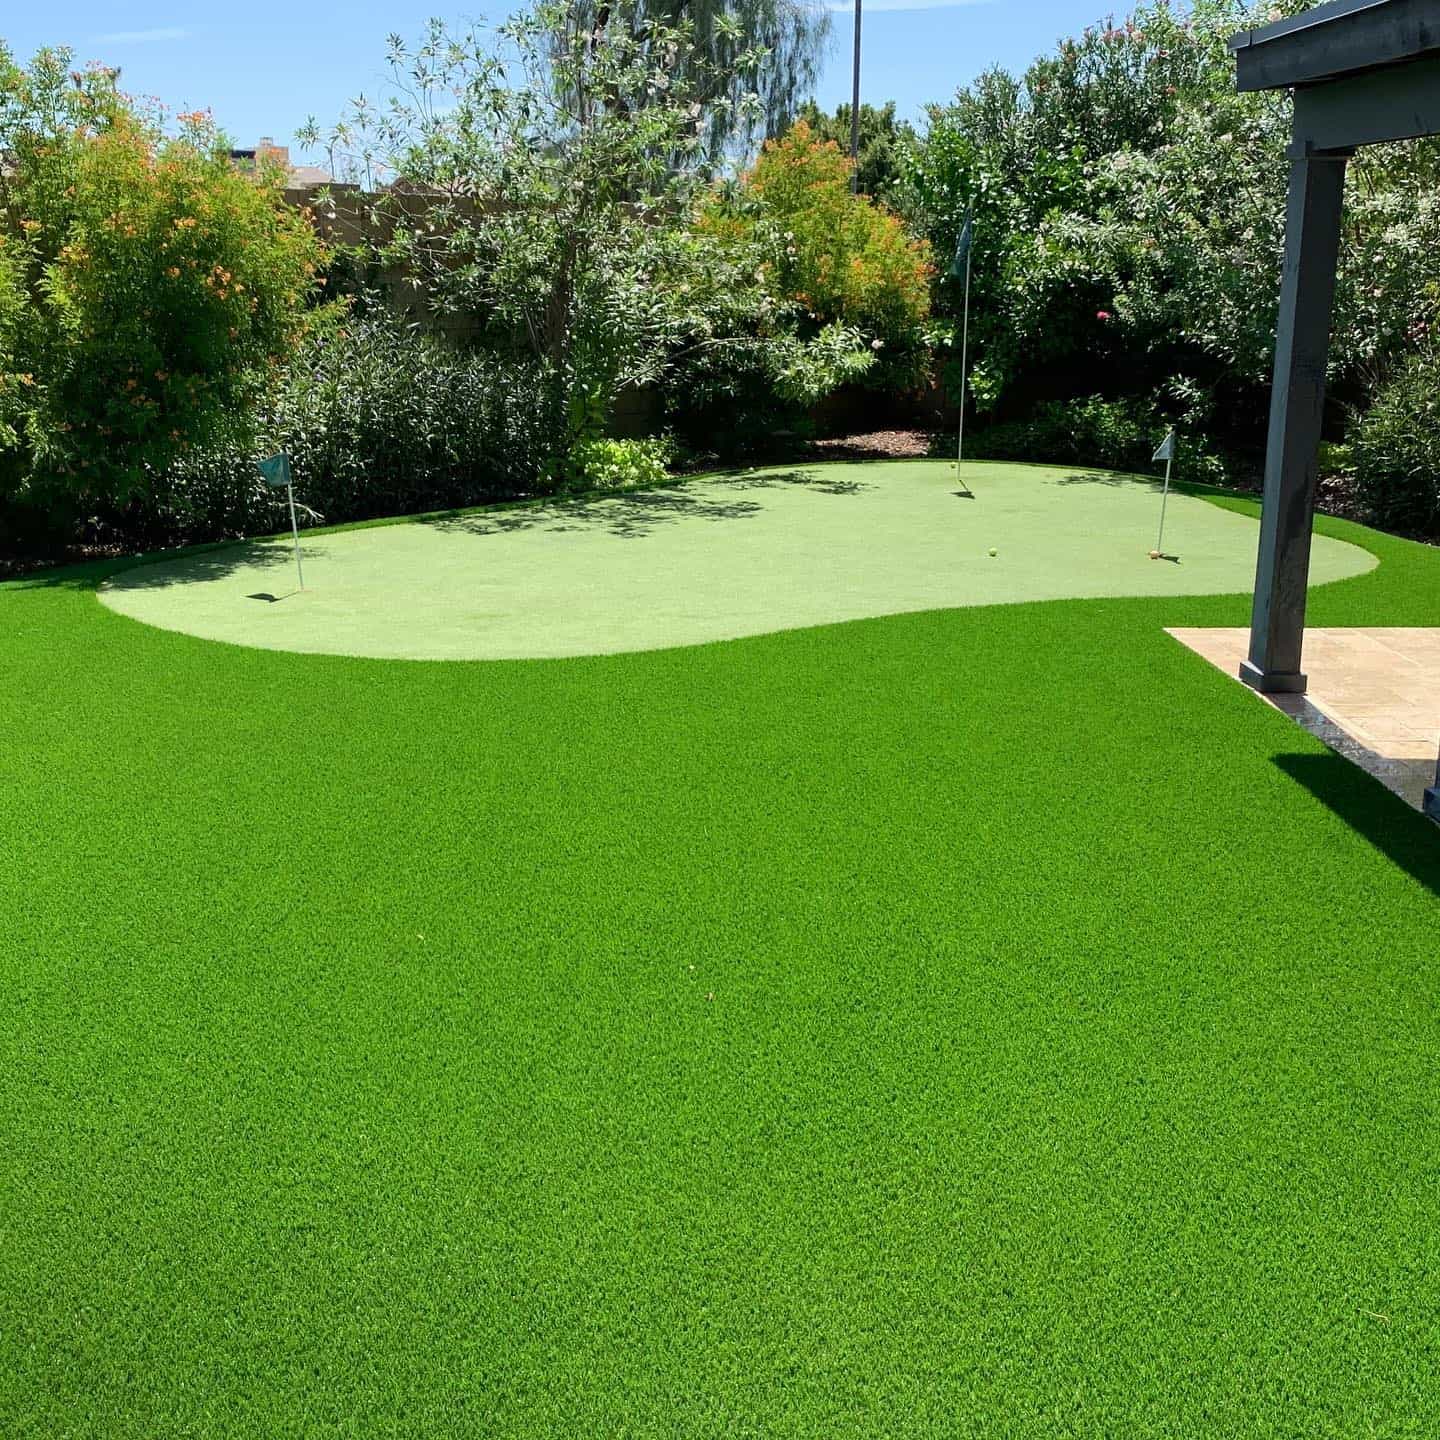 Amazing Backyard Putting Greens with Artificial Grass ...